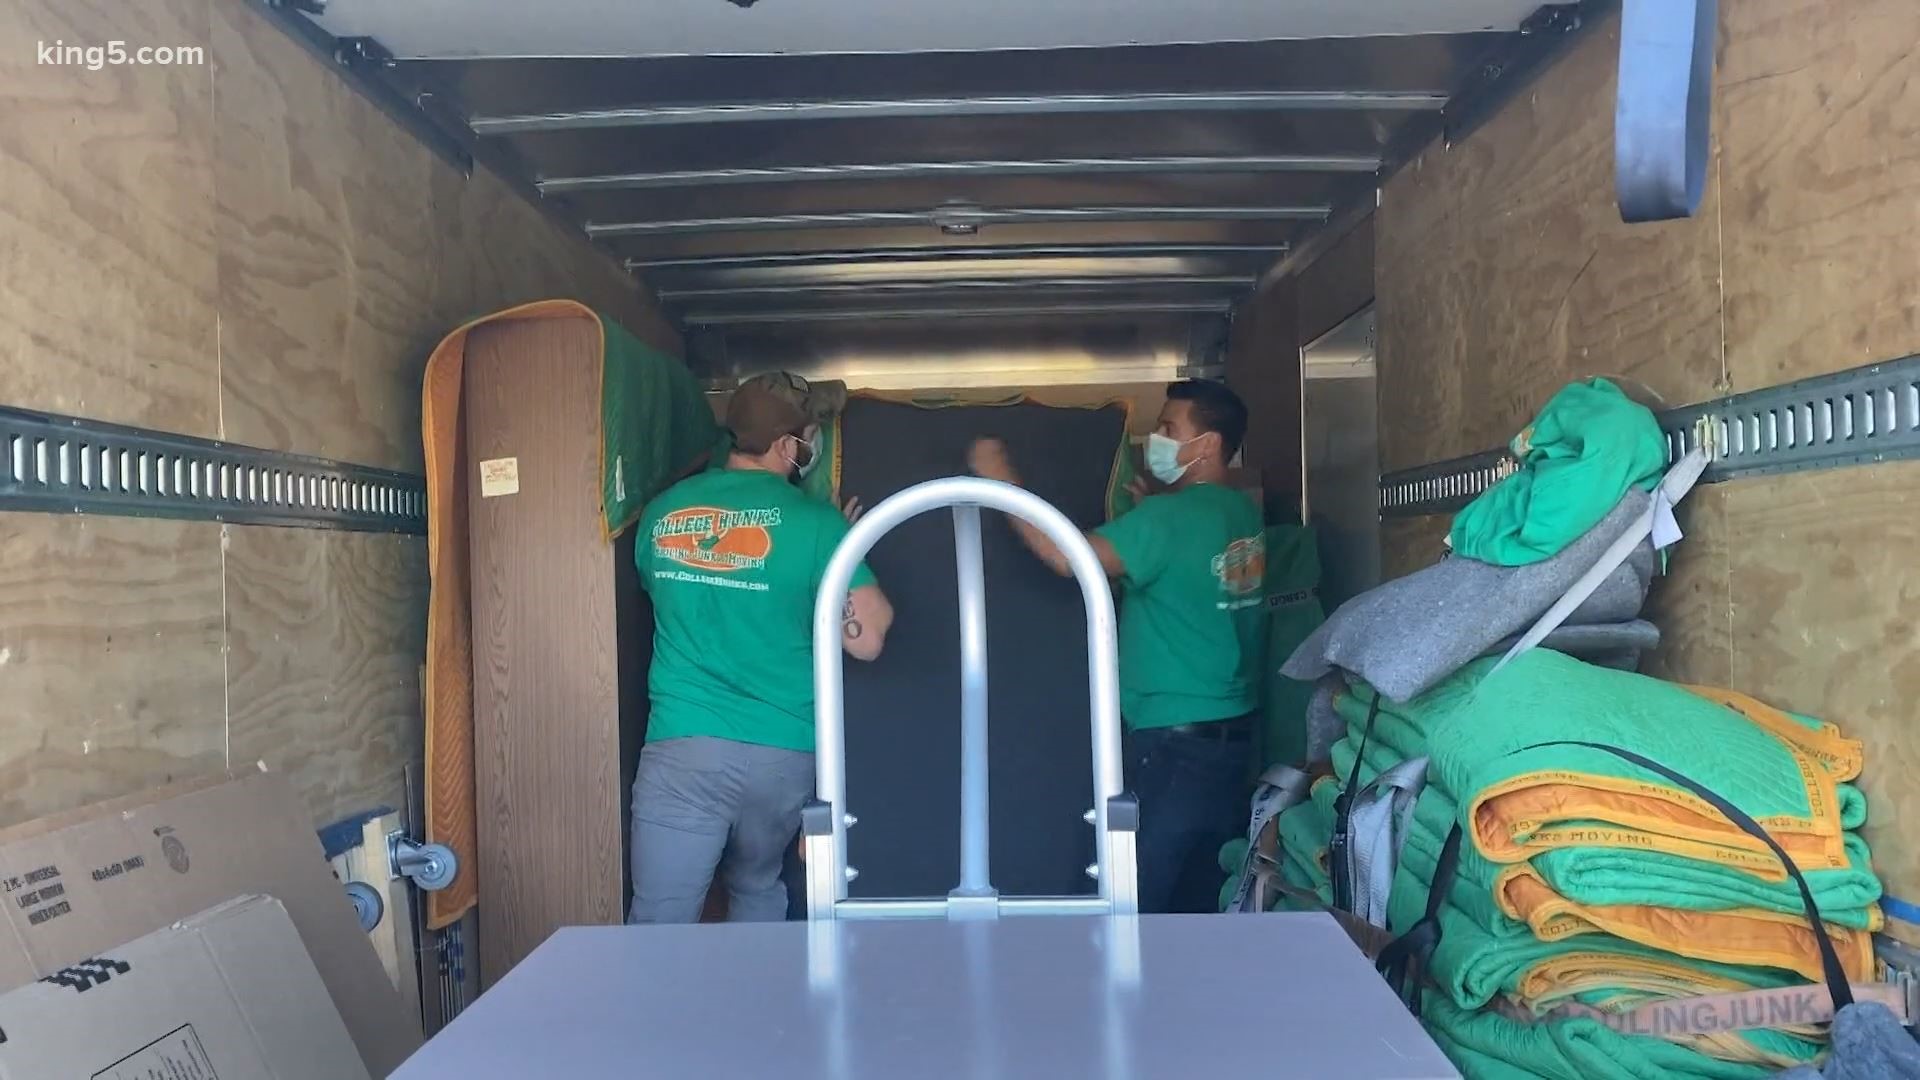 For too many people, moving is escaping. One local moving company has helped domestic violence survivors move into safer situations.